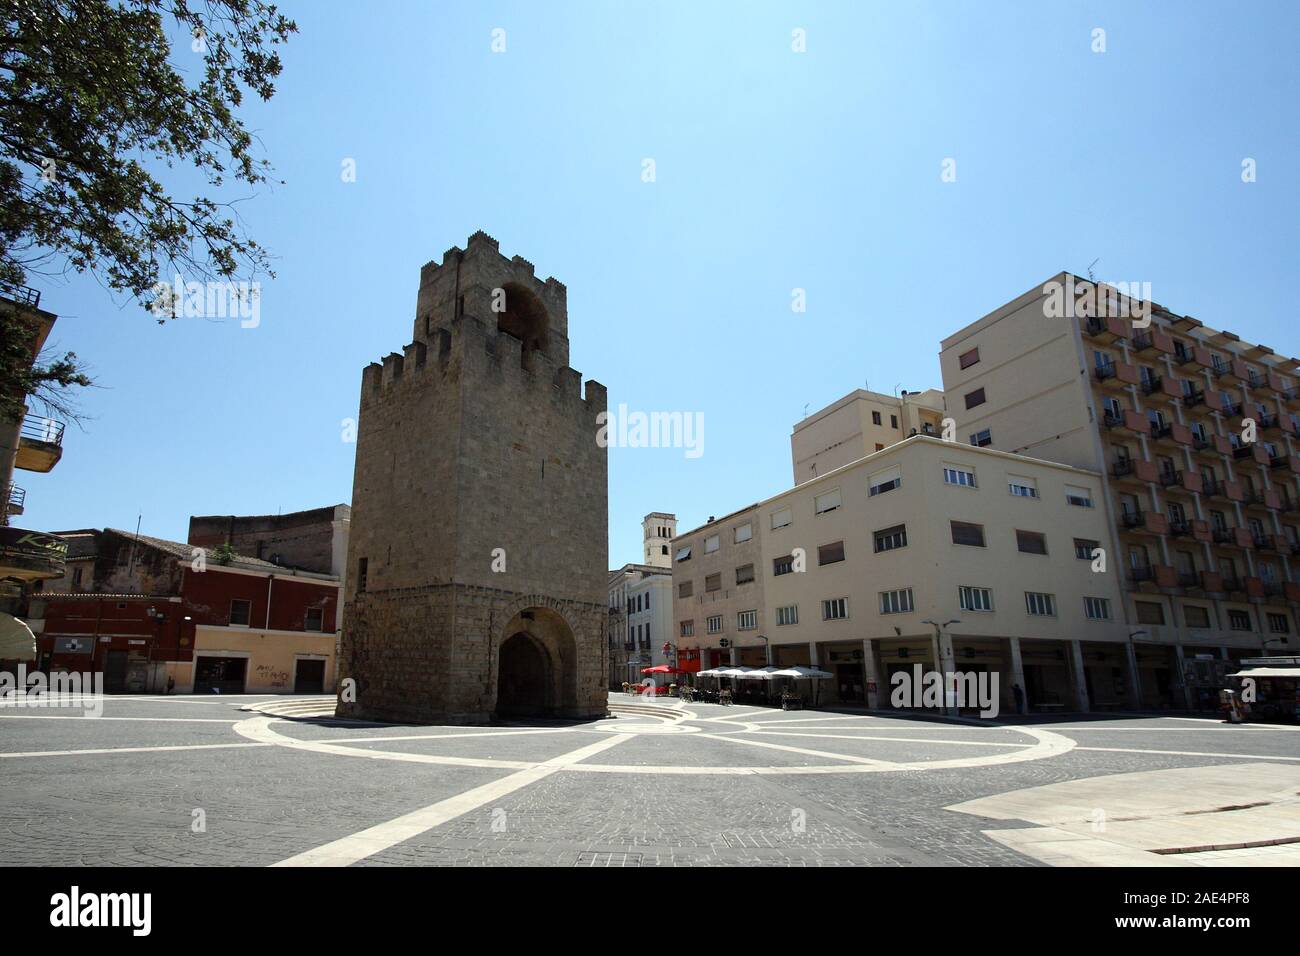 Oristano, Italy - 6 July 2011: The Tower of Piazza Roma Stock Photo